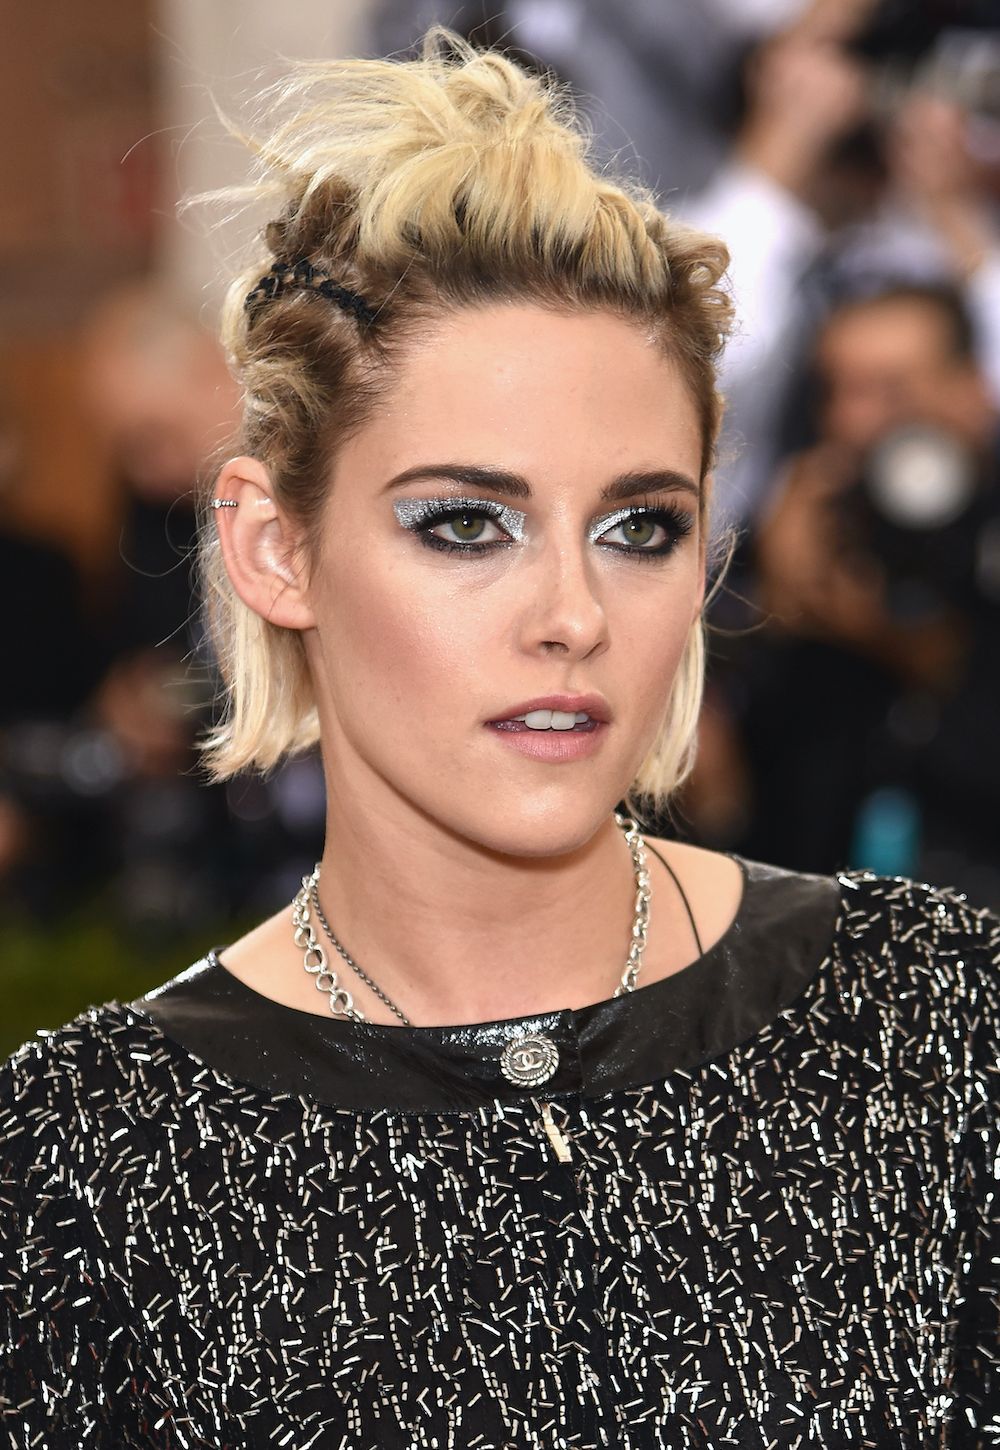 <p>                     Kristen Stewart knows how to work a grungey make-up look and her ensemble for the 2016 Met Gala was no exception. Her smudgy liner was paired with geometric silver eyeshadow were a real statement, making for a truly standout creation.                   </p>